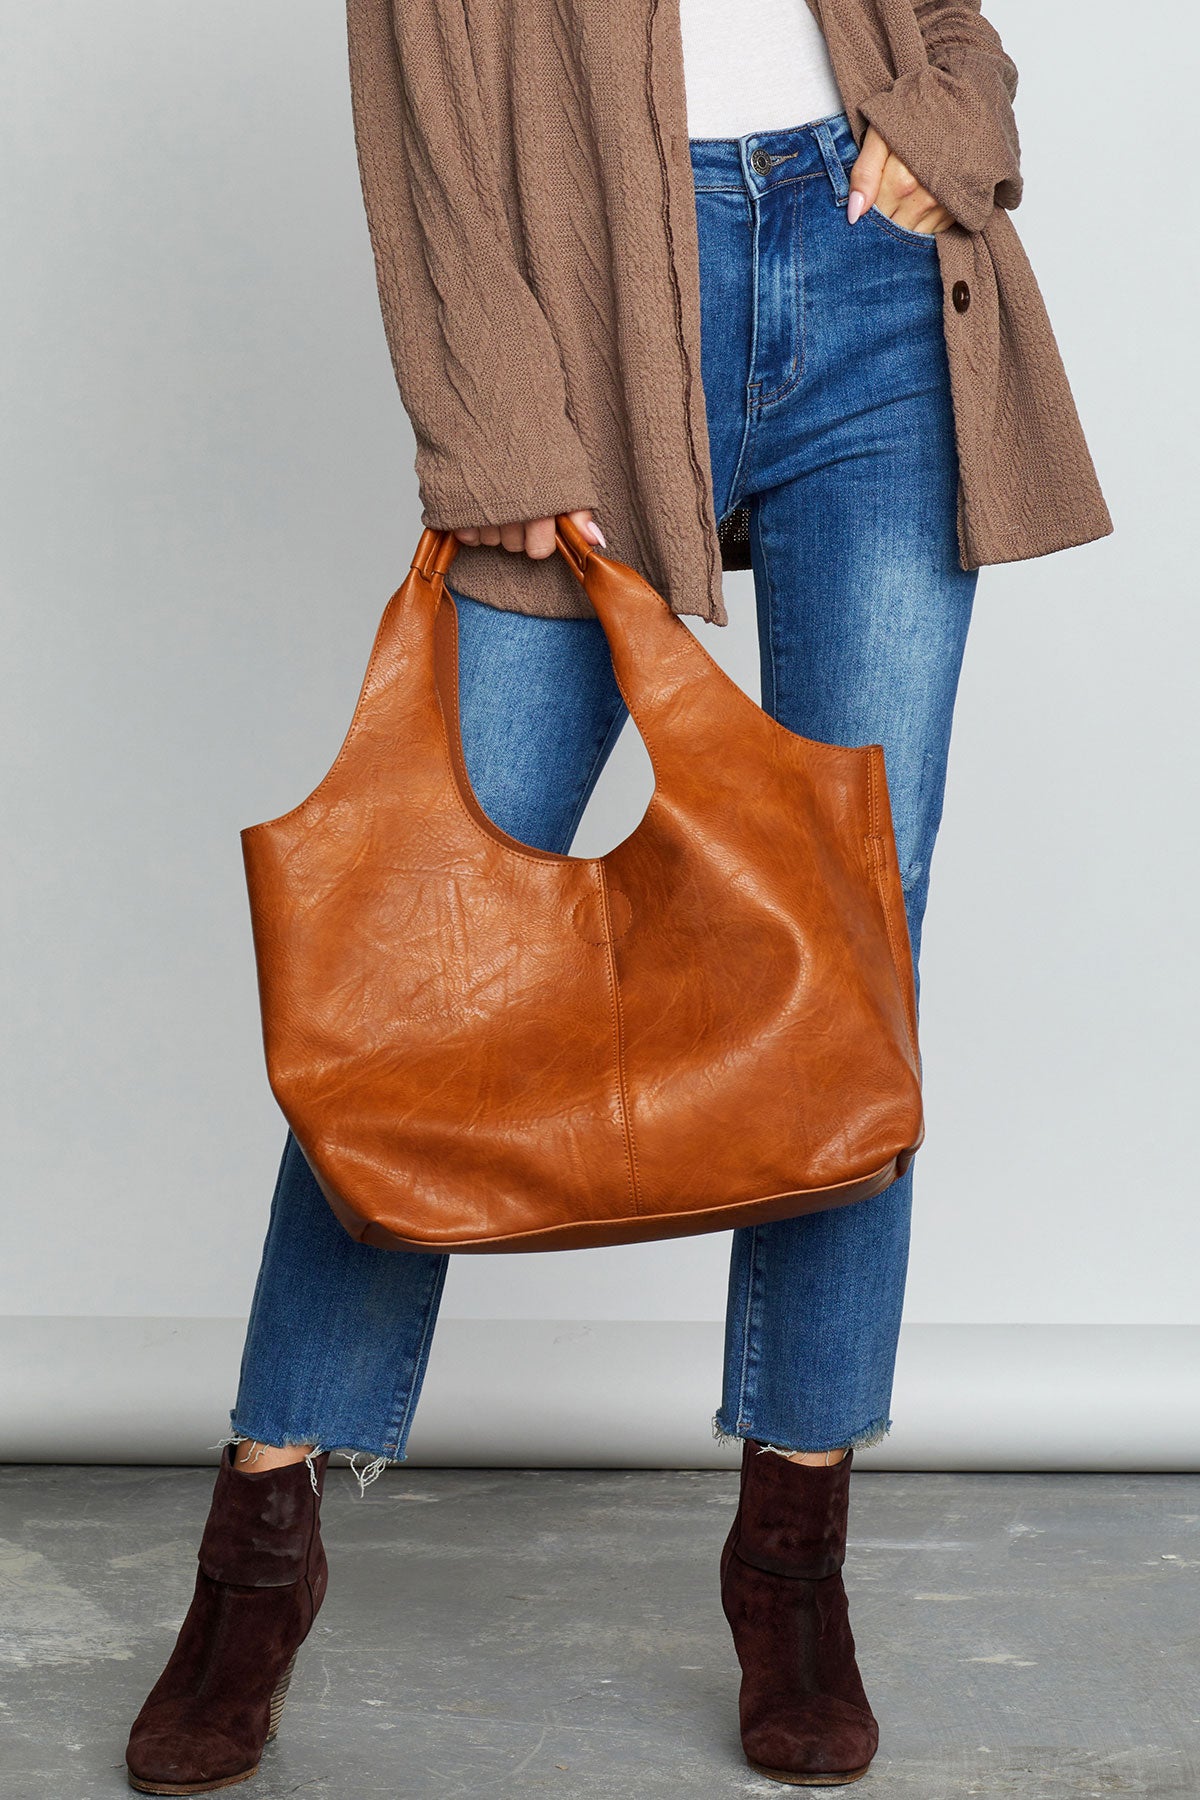 Social Threads Vegan Leather Hobo Bag (Comes with Detachable Insert Small Bag) | Camel | Size One Size